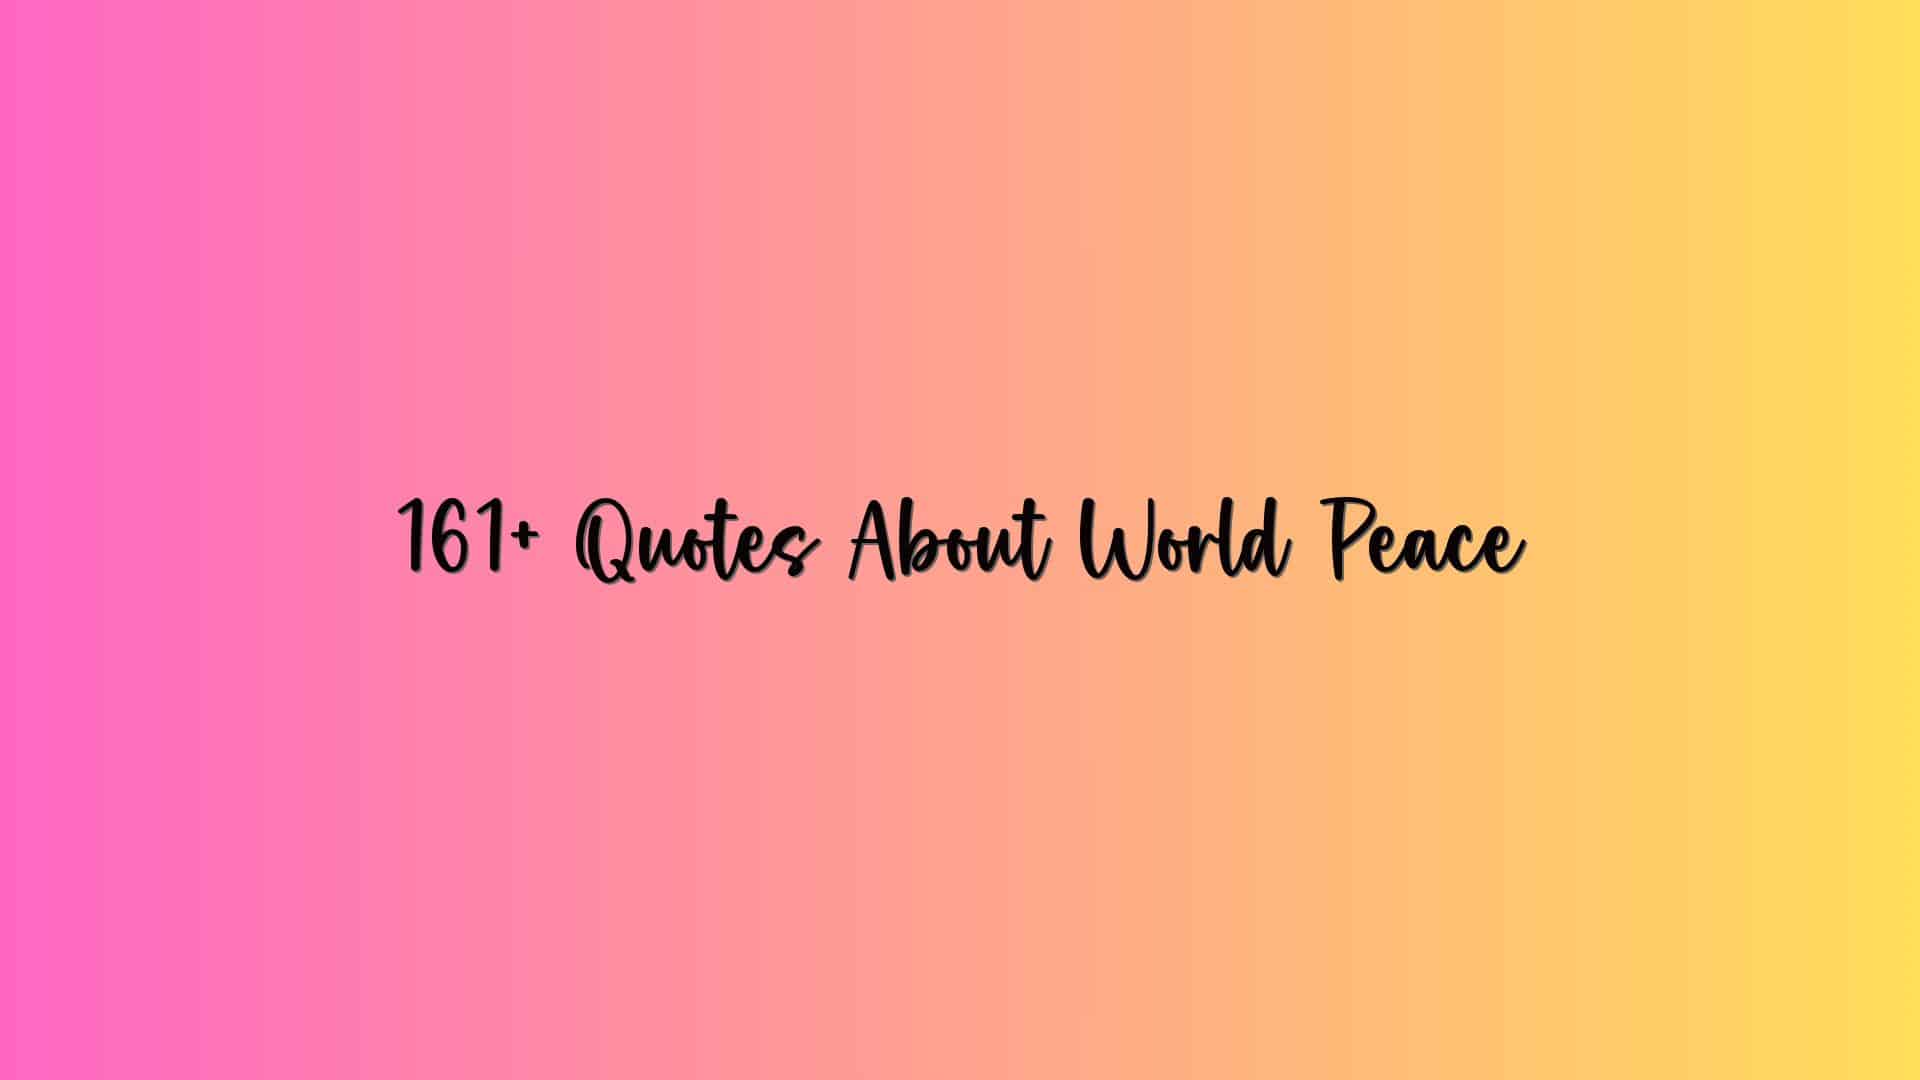 161+ Quotes About World Peace